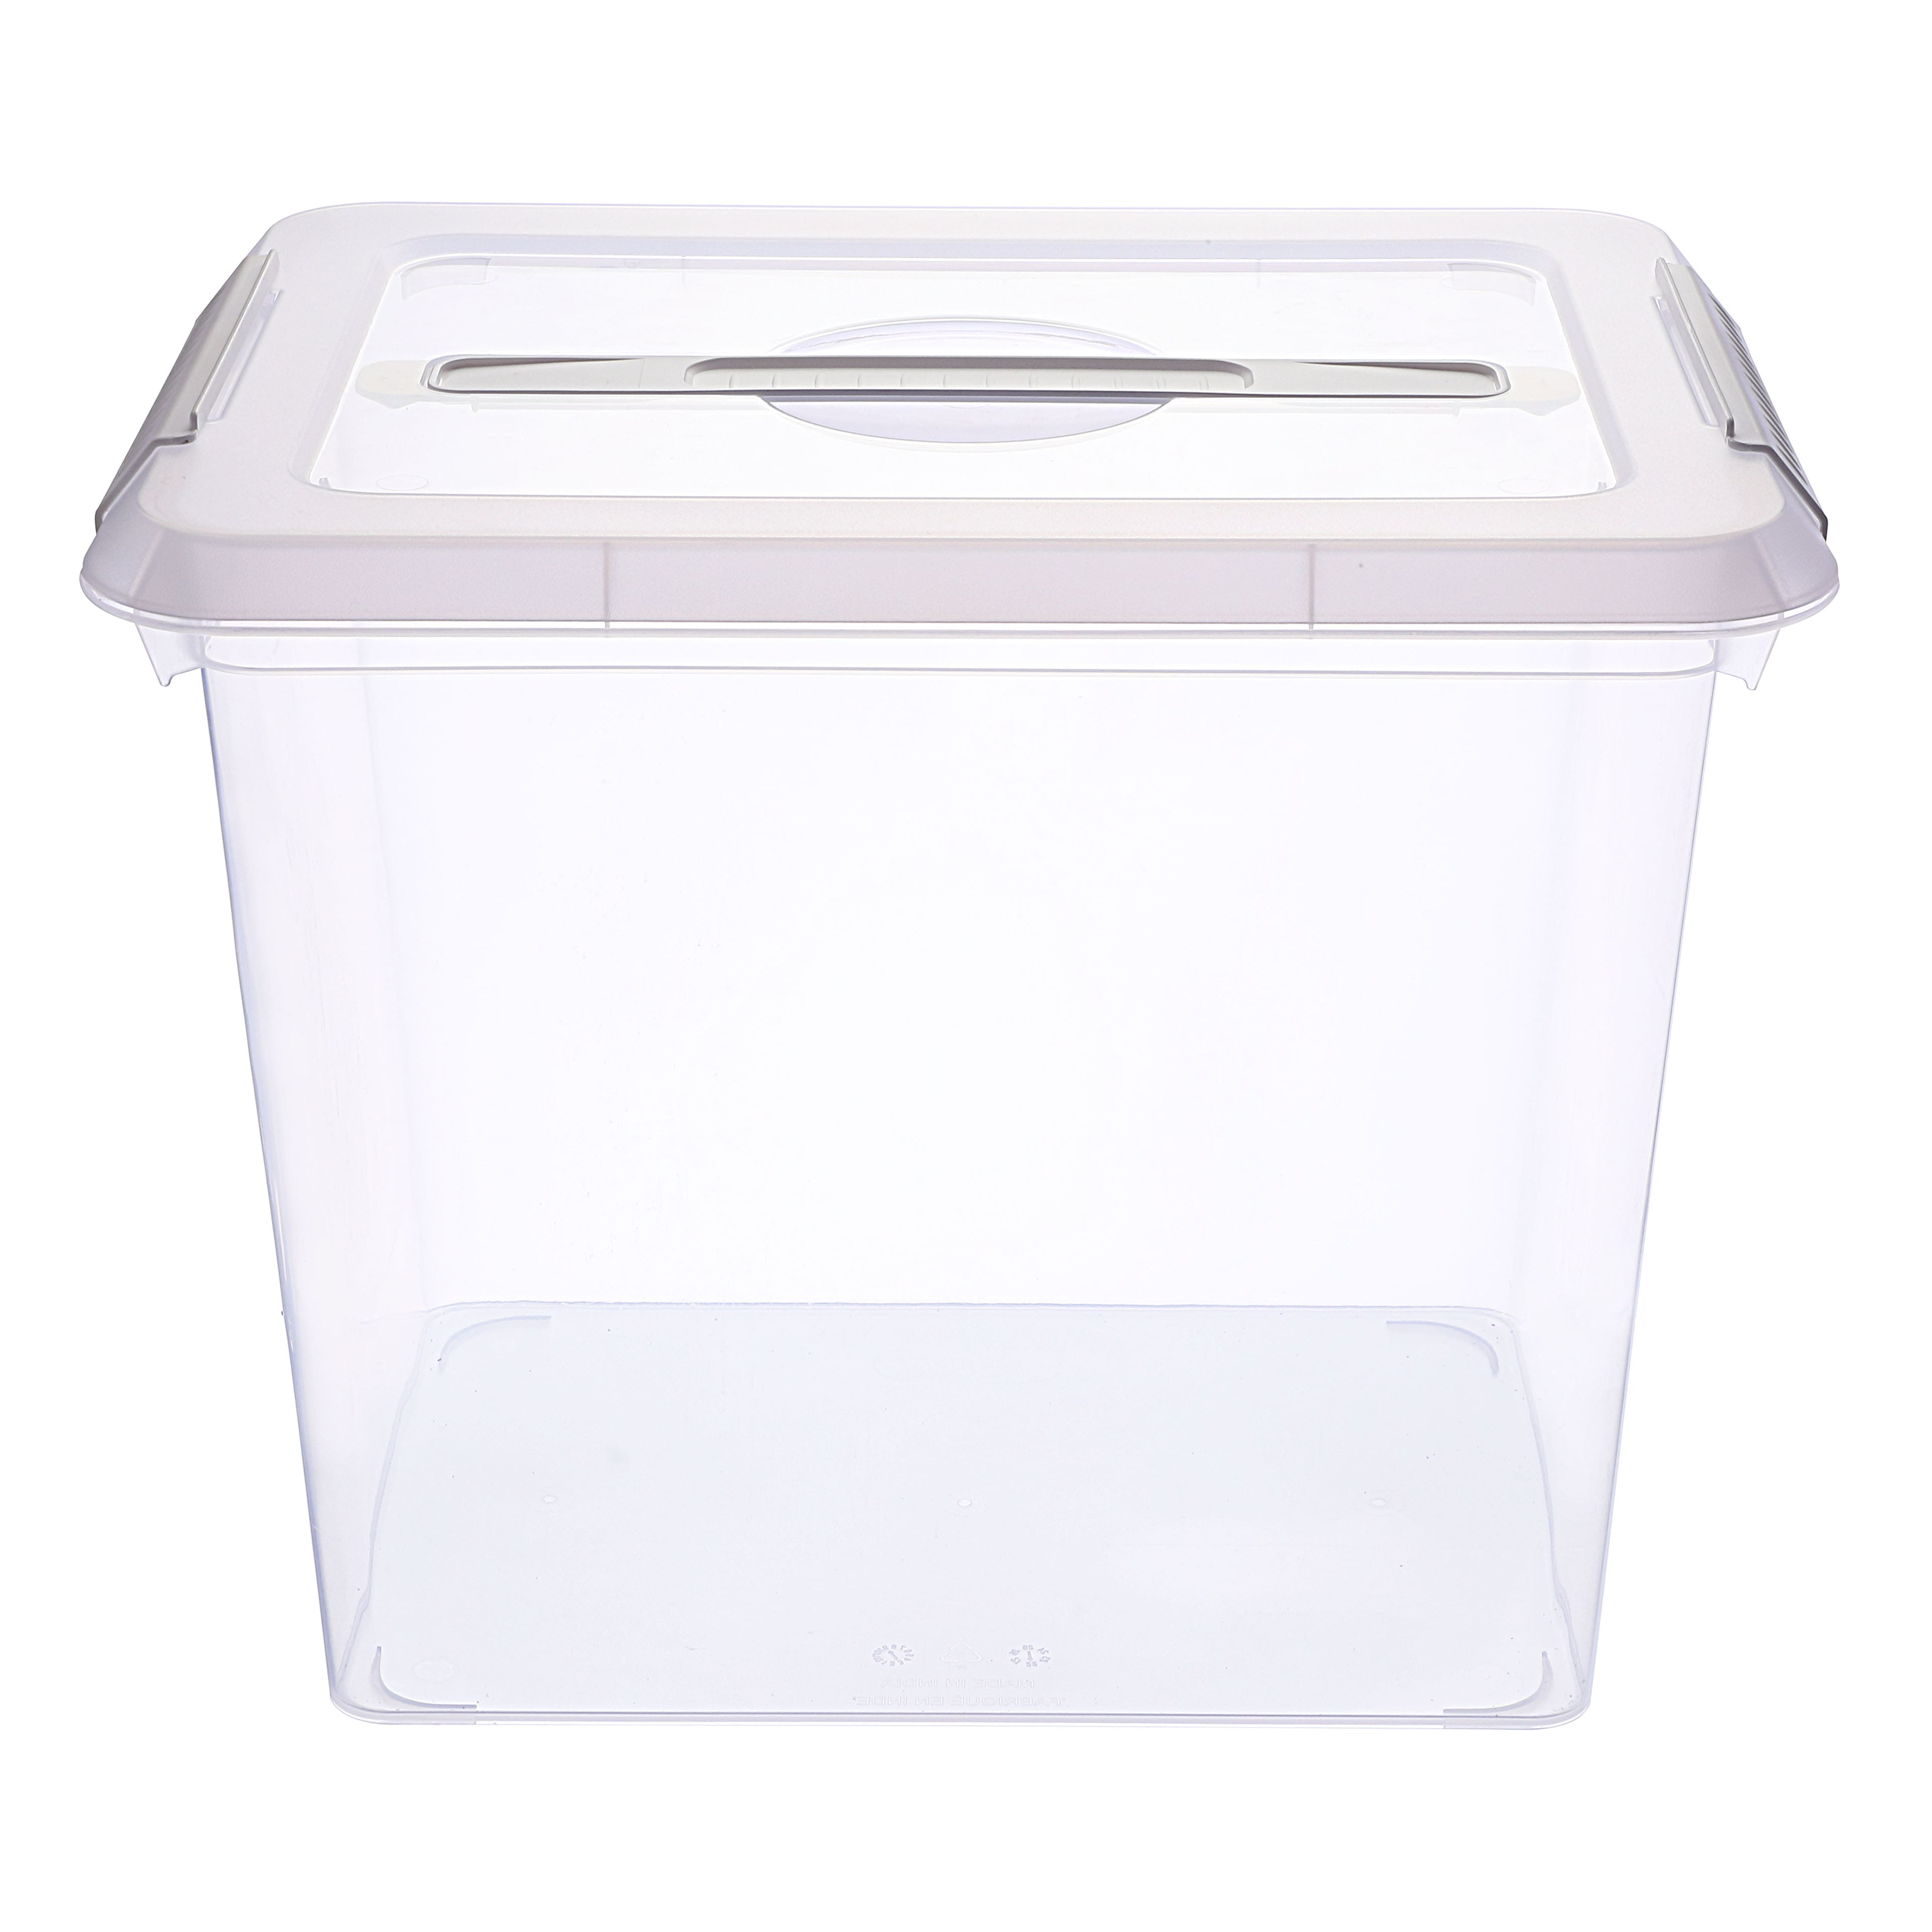 26 Plastic Containers W/lids Multi Sizes 